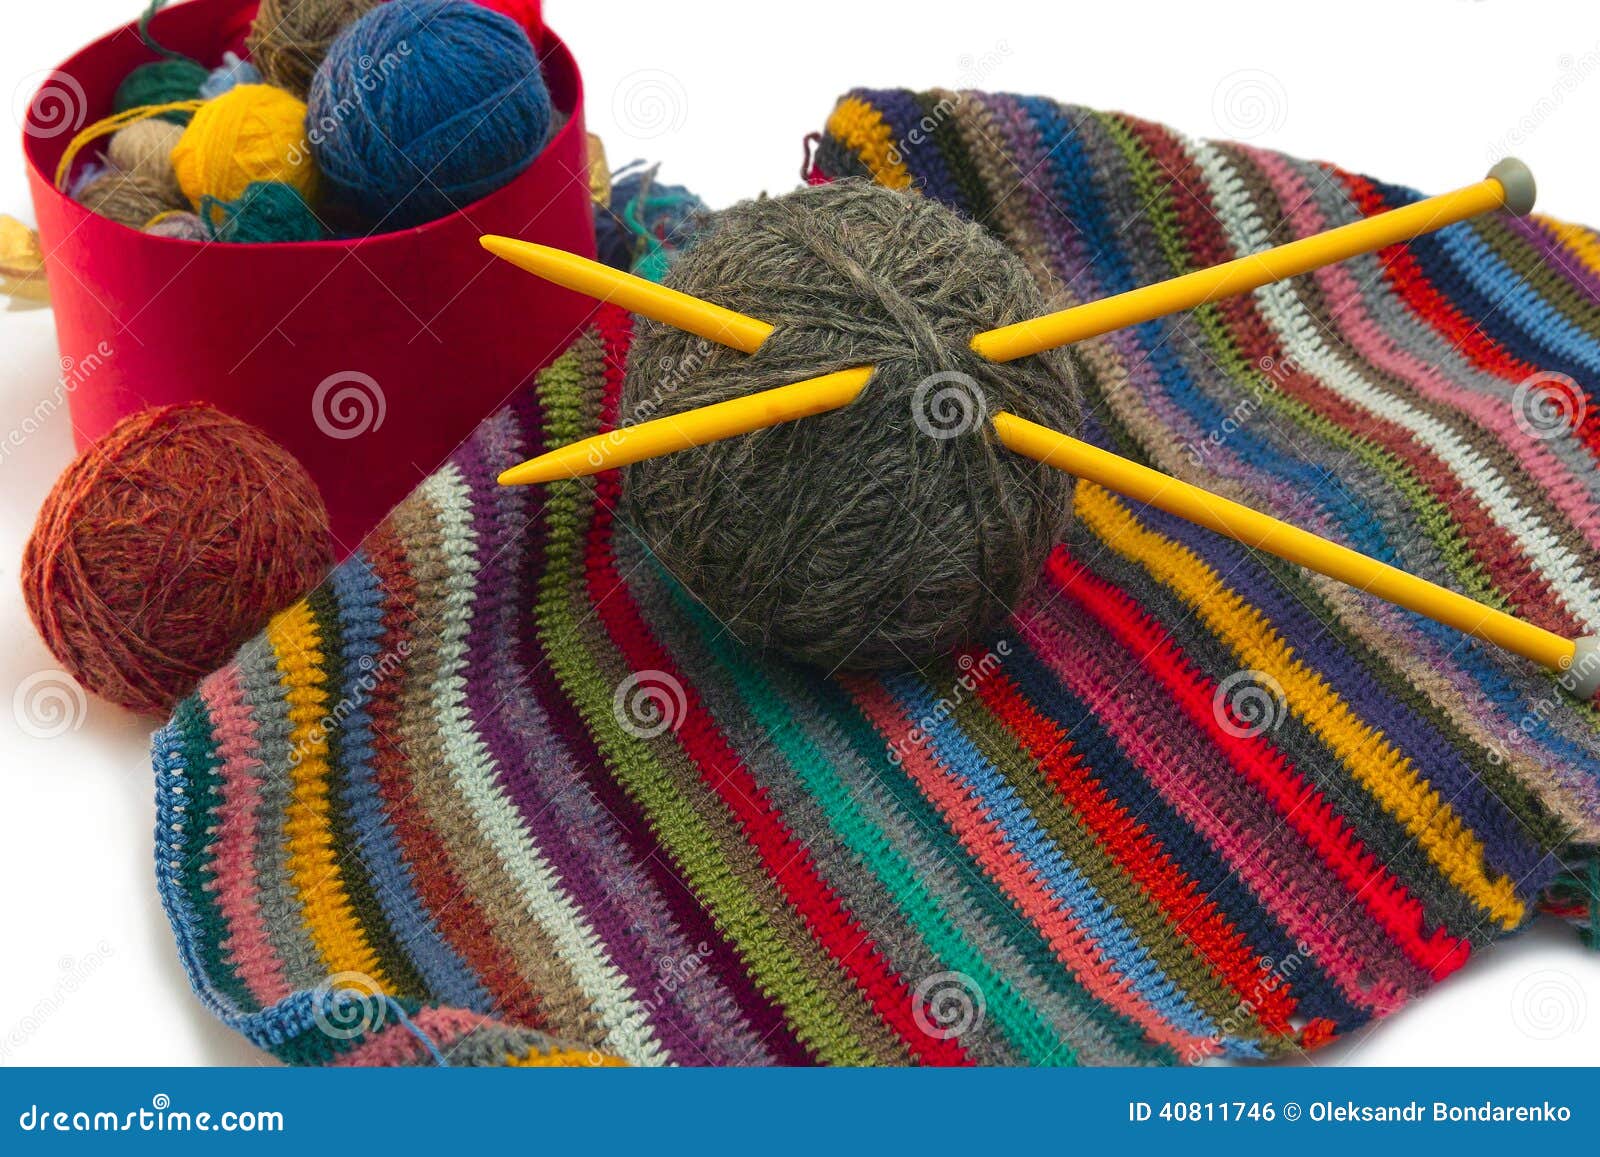 Knitting, threads stock photo. Image of bound, canvas - 40811746